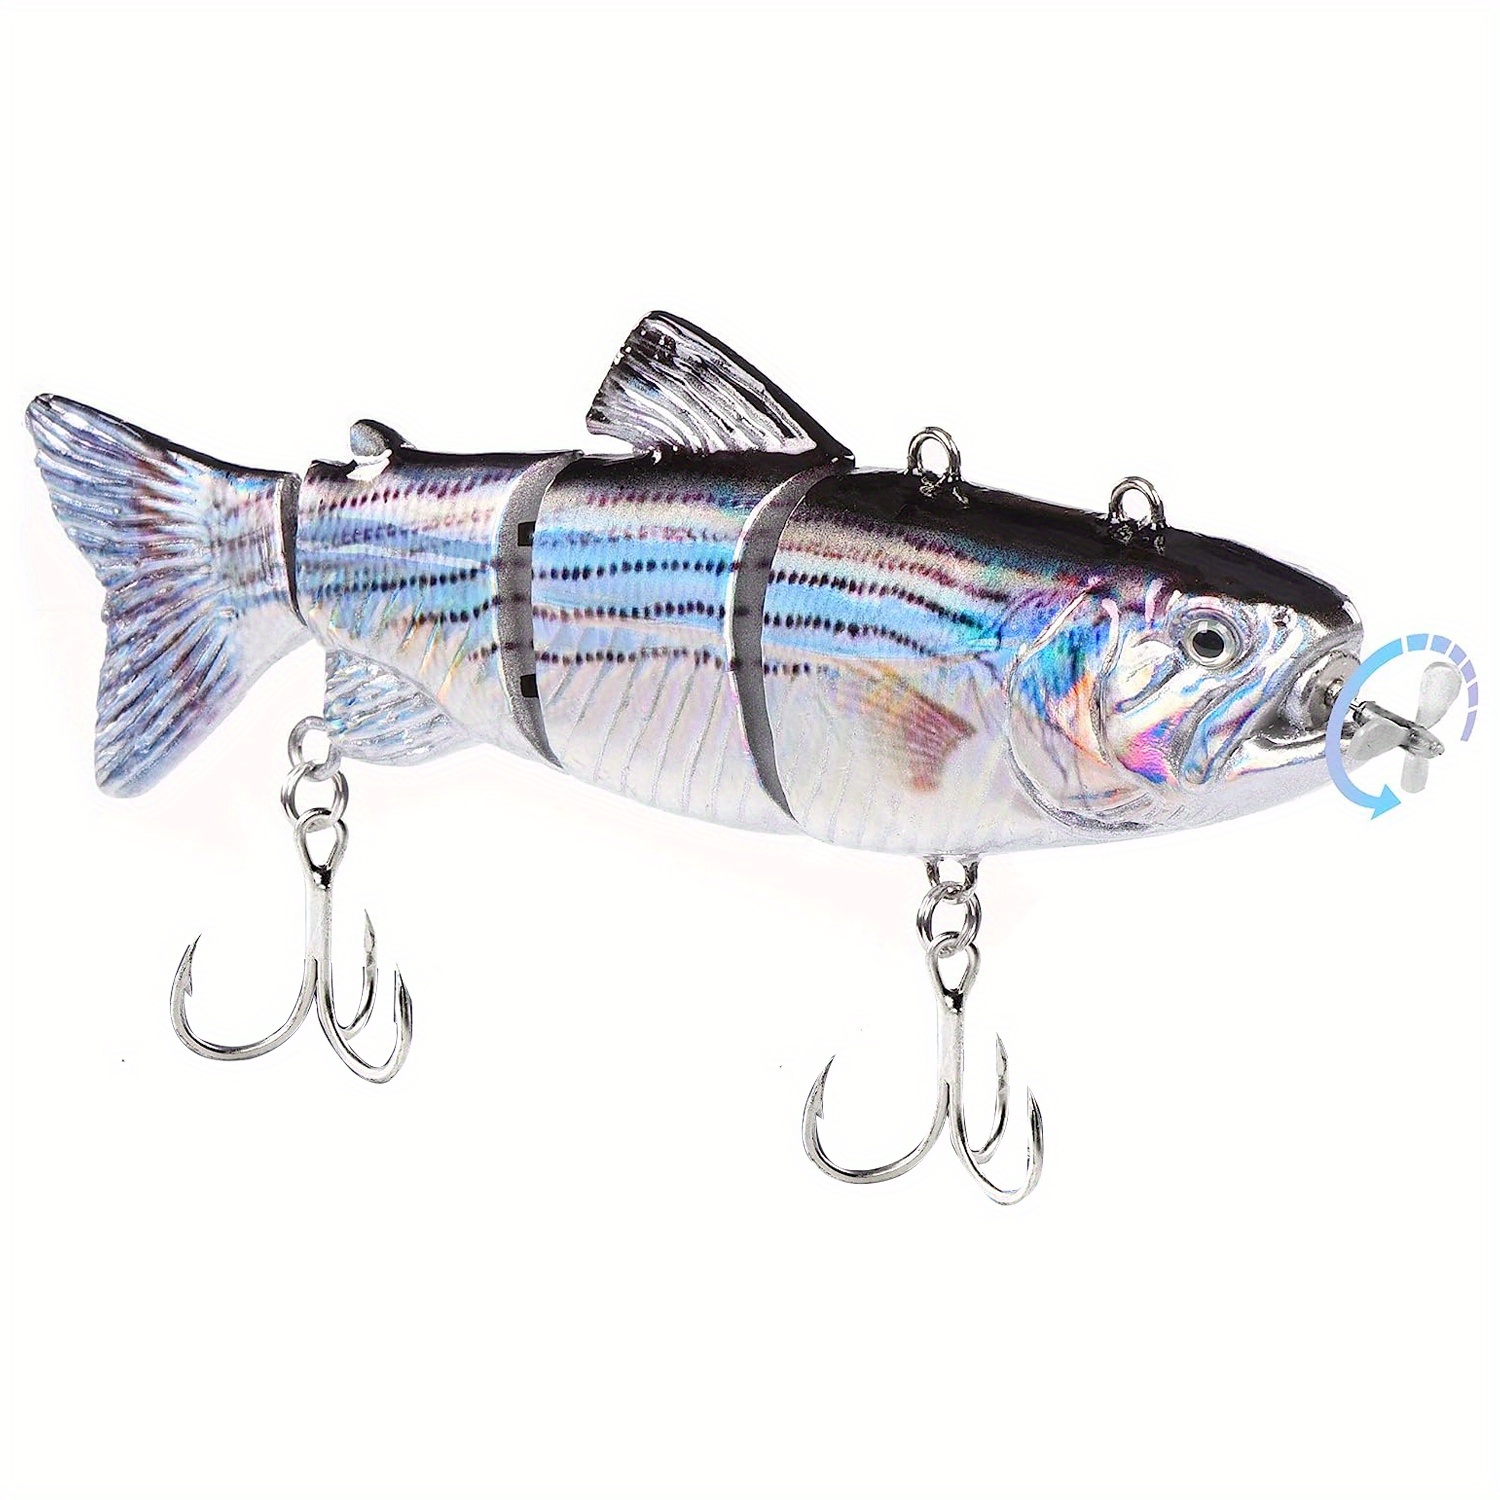 2.75 Oz A40 Style Swimmer Fishing Lure Kit